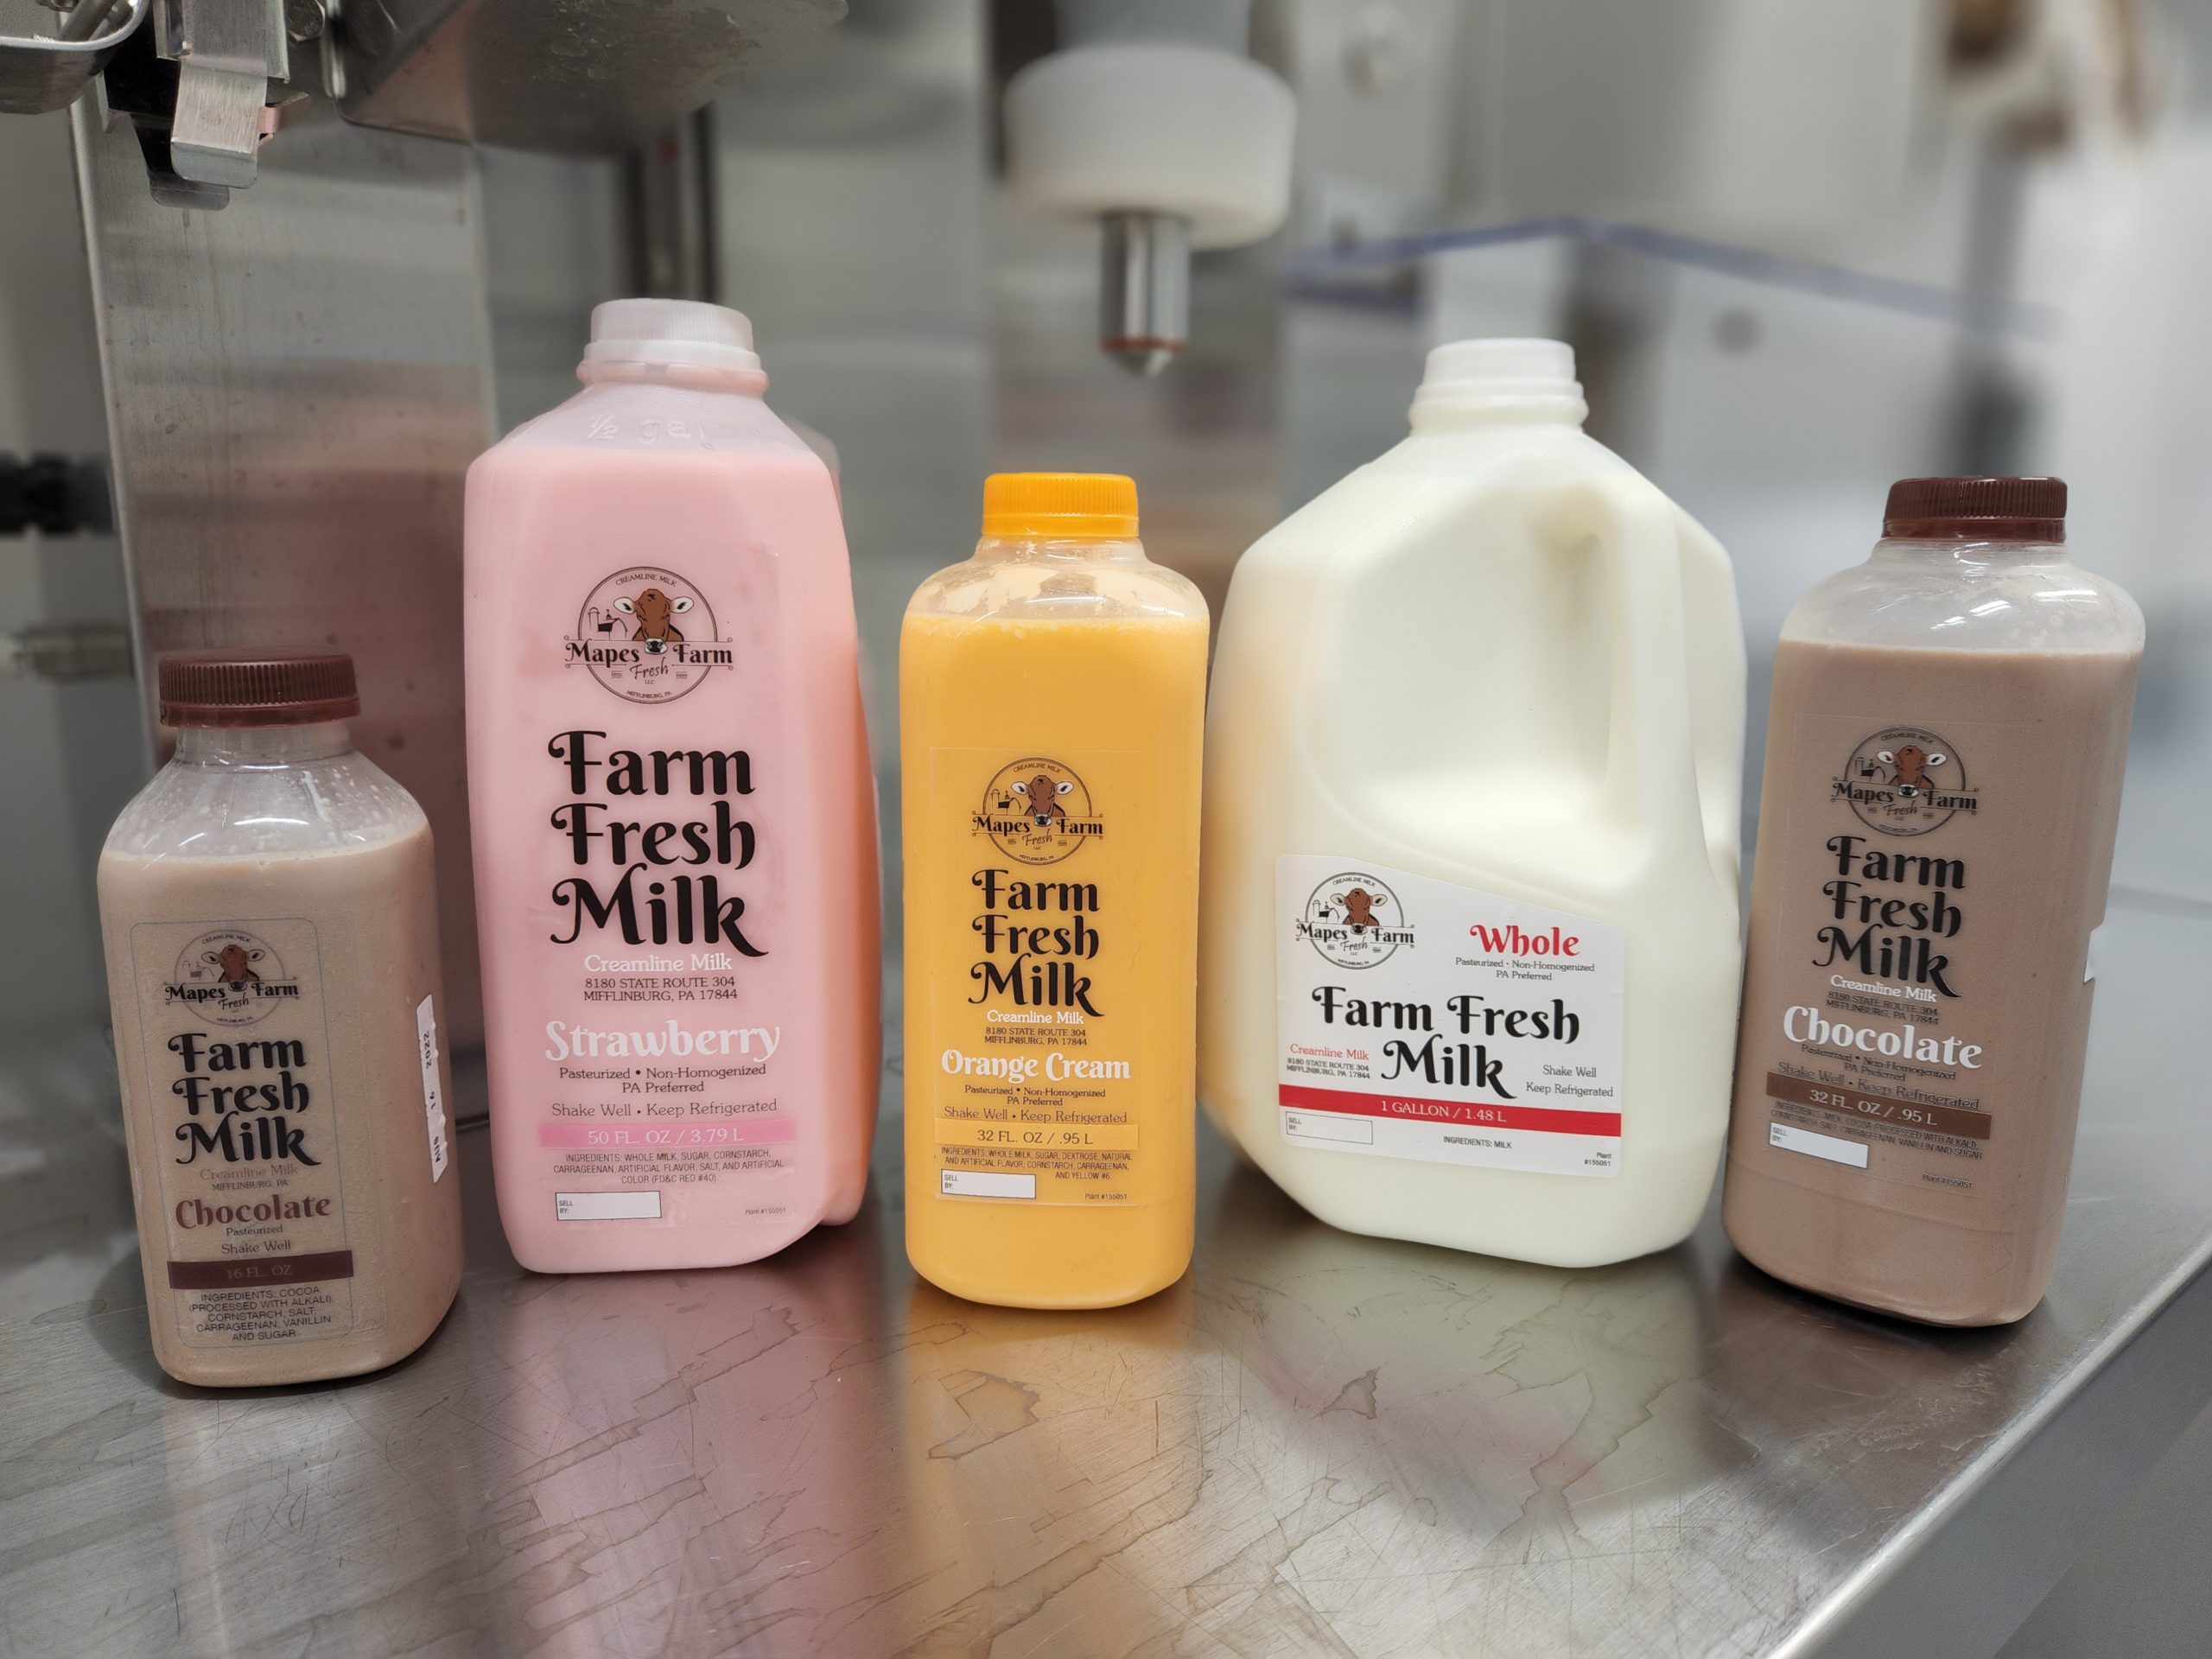 Two bottles of chocolate milk, a bottle of strawberry milk, a bottle of orange cream, and a bottle of whole milk.